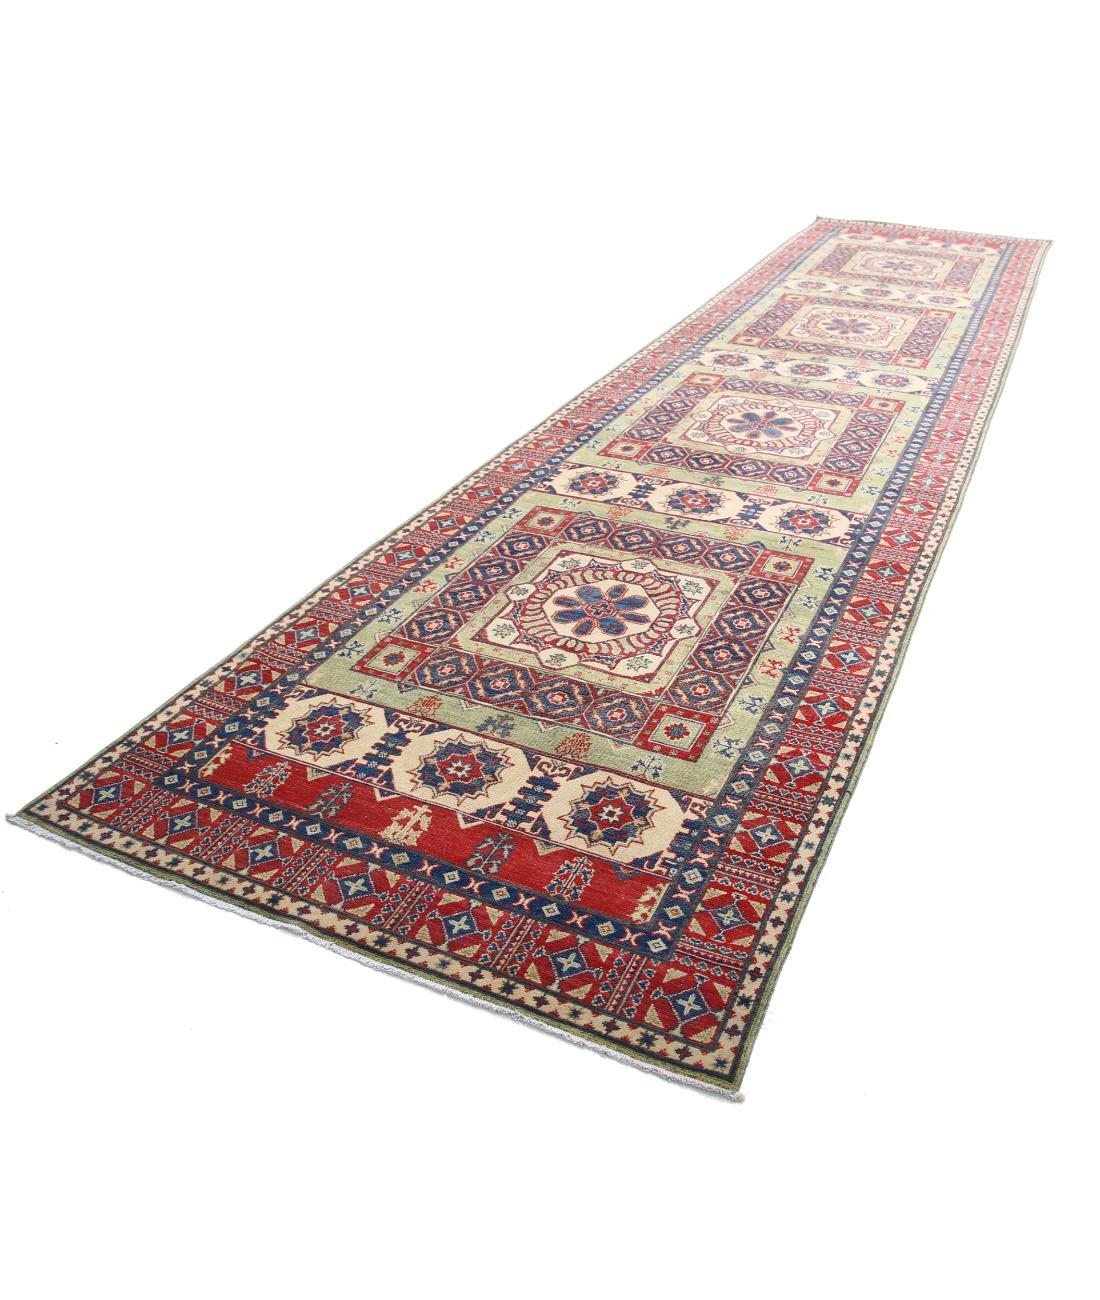 Hand Knotted Tribal Kazak Wool Rug - 4'11'' x 19'5'' 4' 11" X 19' 5" (150 X 592) / Red / Ivory